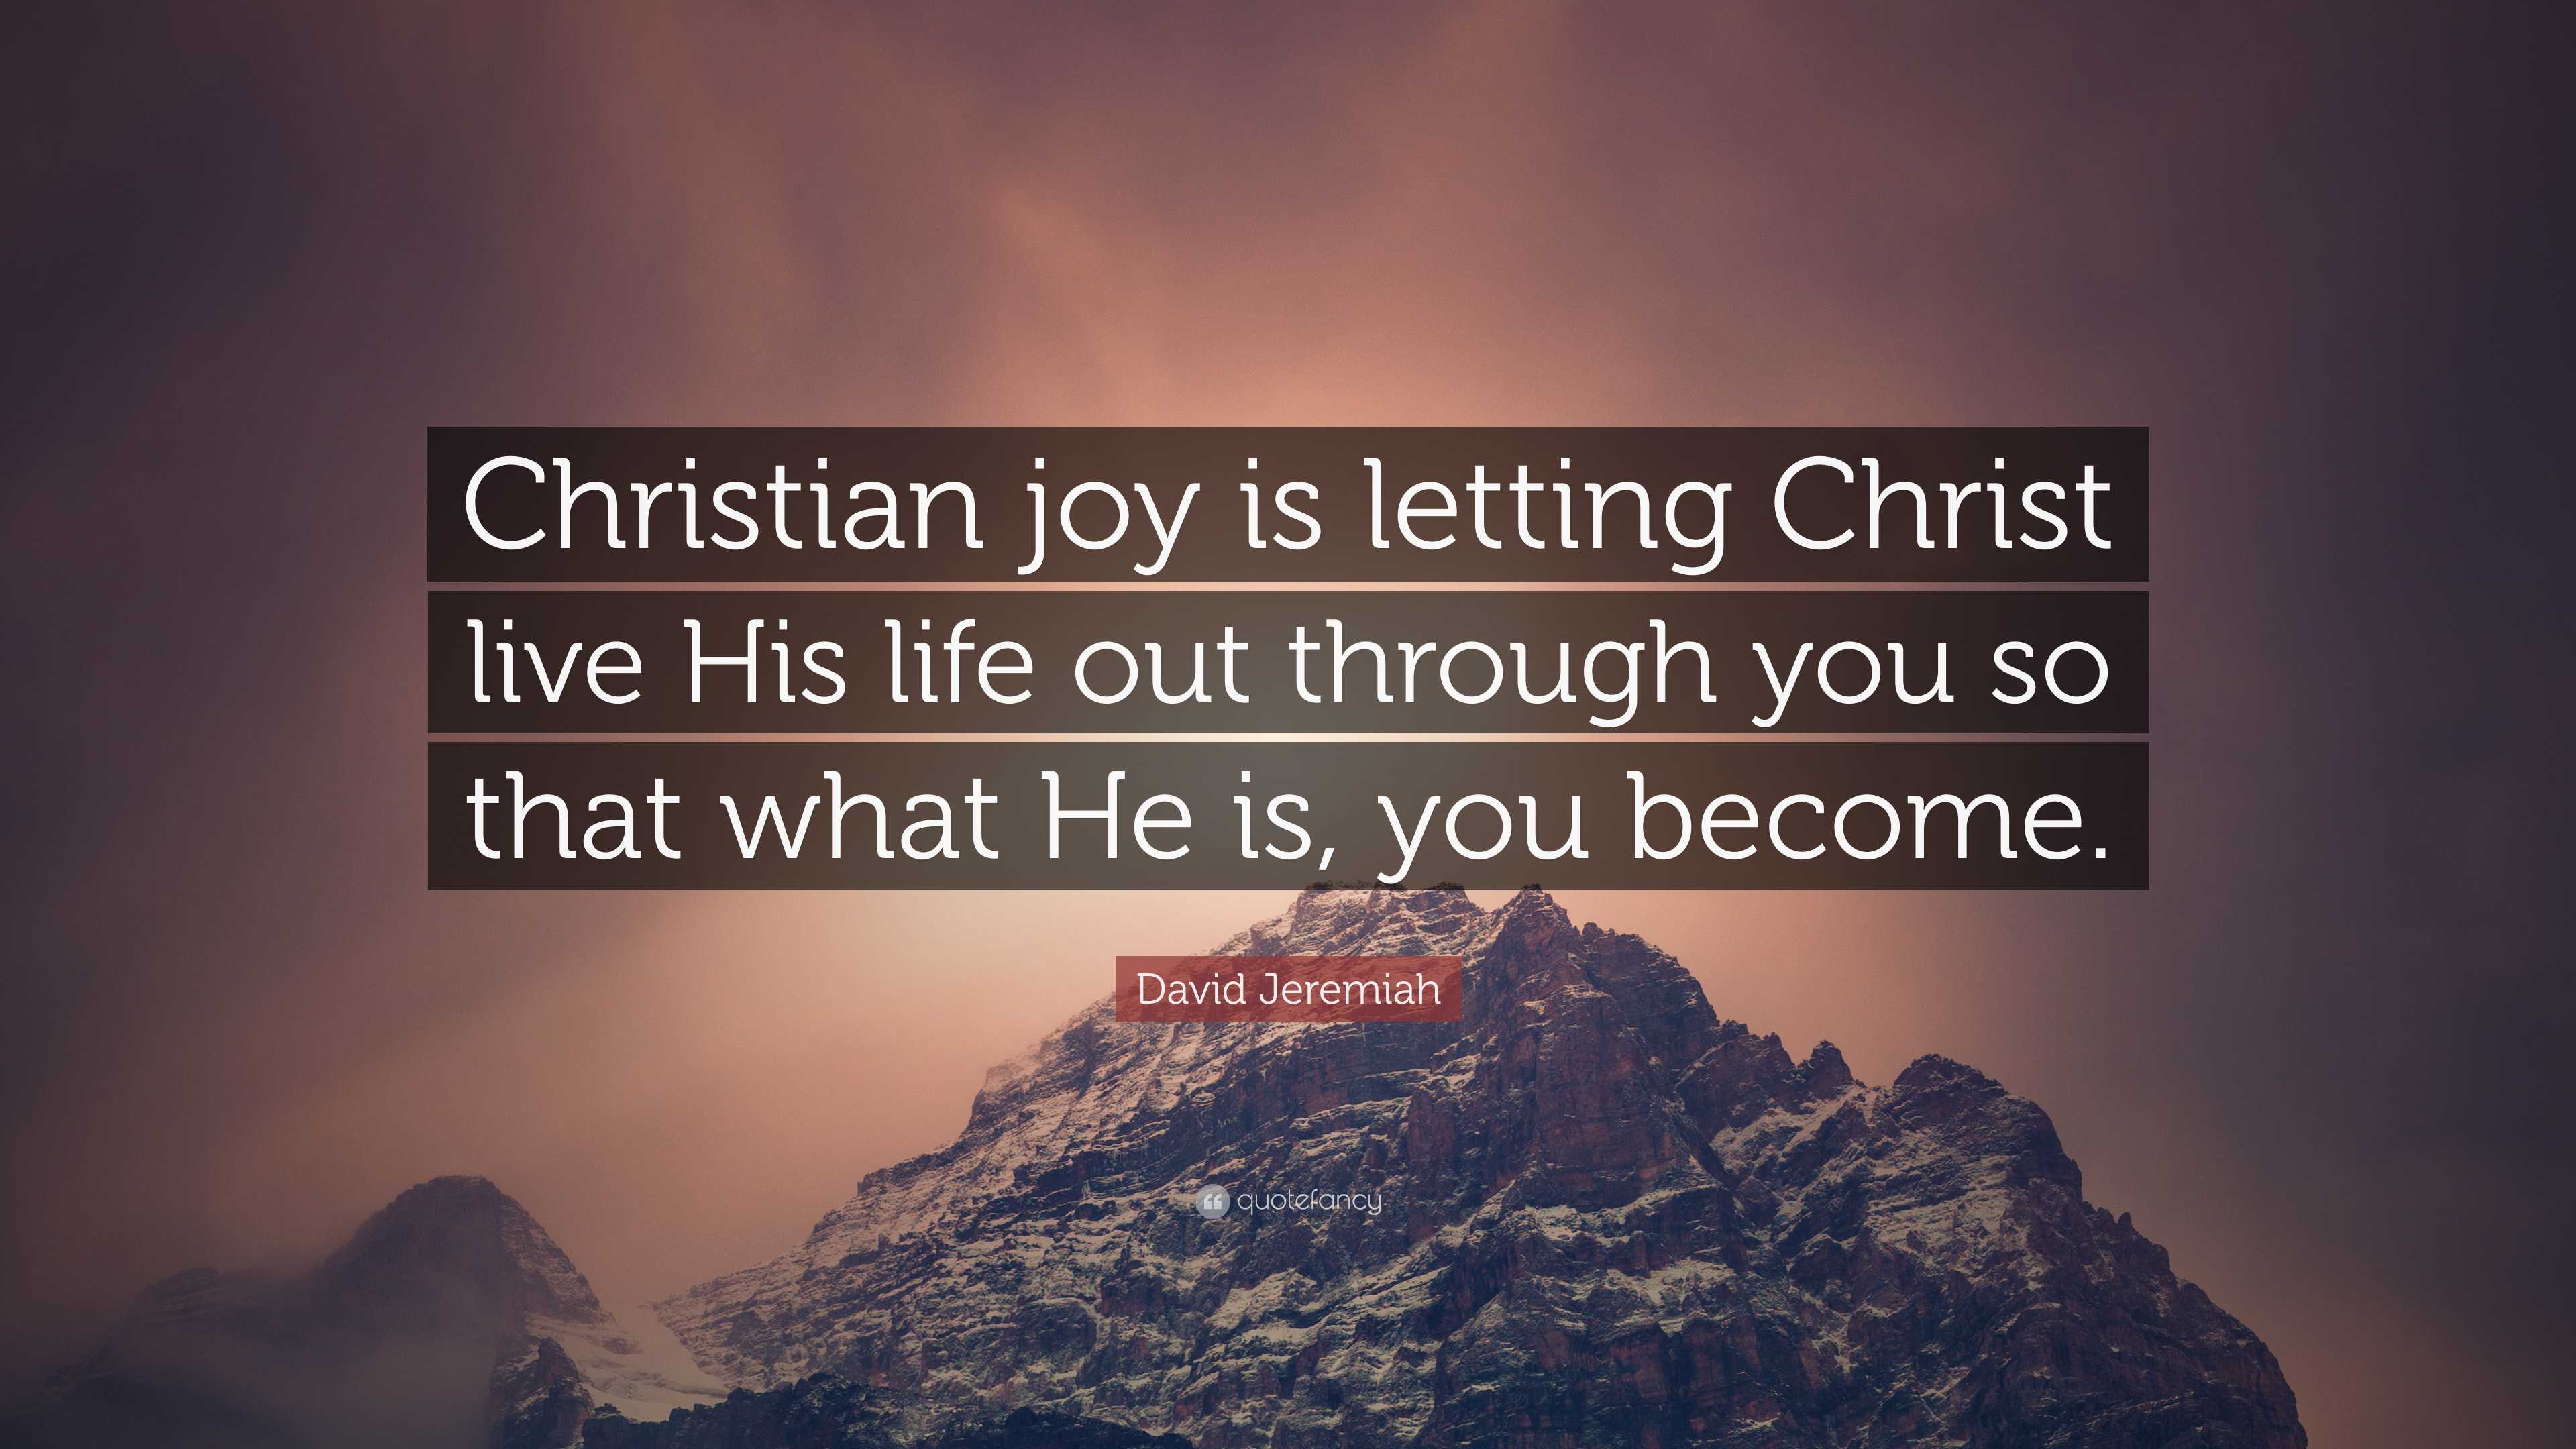 David Jeremiah Quote: “Christian joy is letting Christ live His life ...